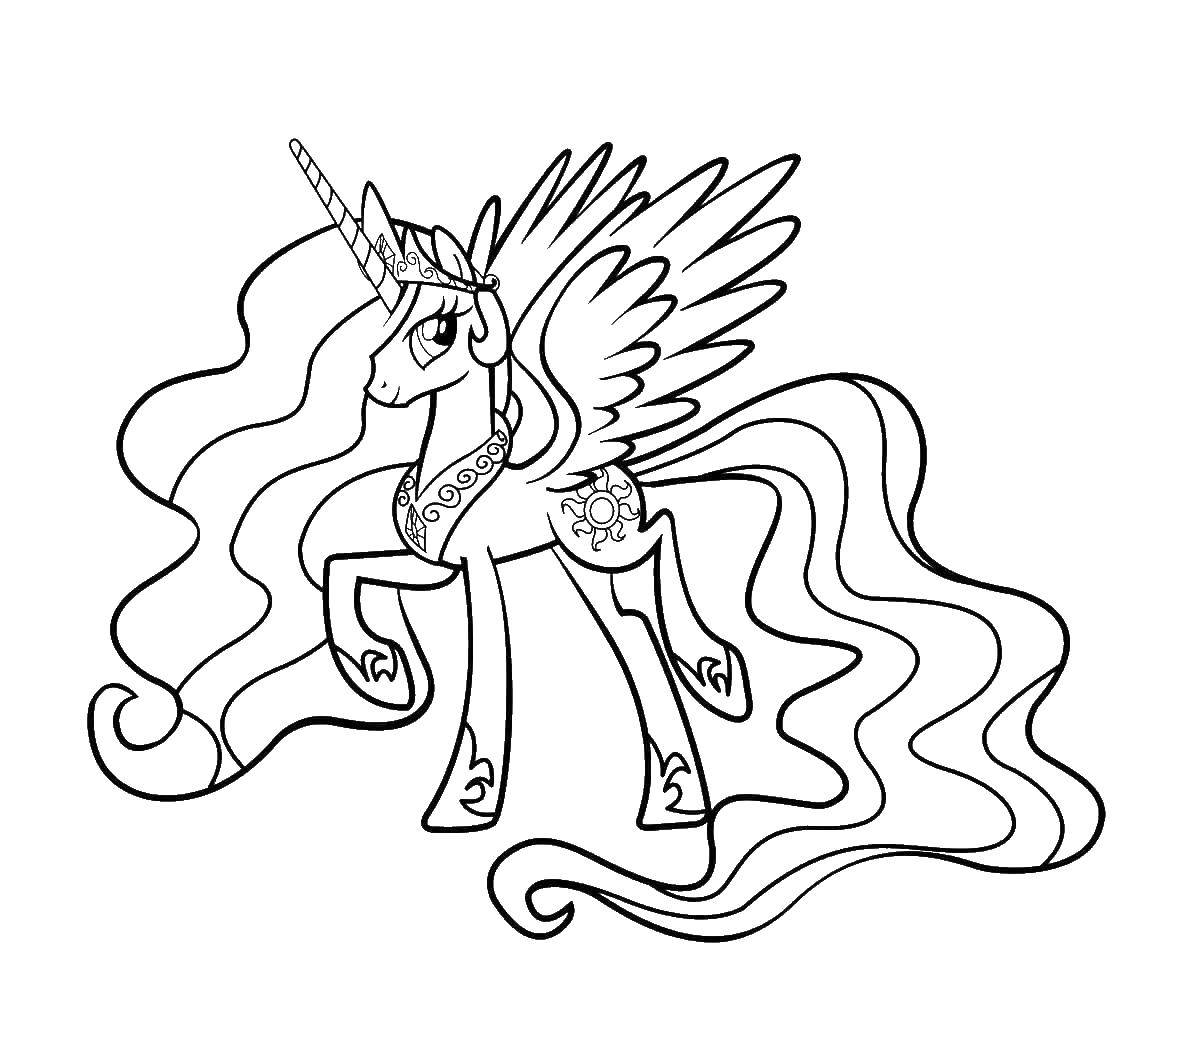 Coloring Graceful pony. Category Ponies. Tags:  Pony, My little pony.